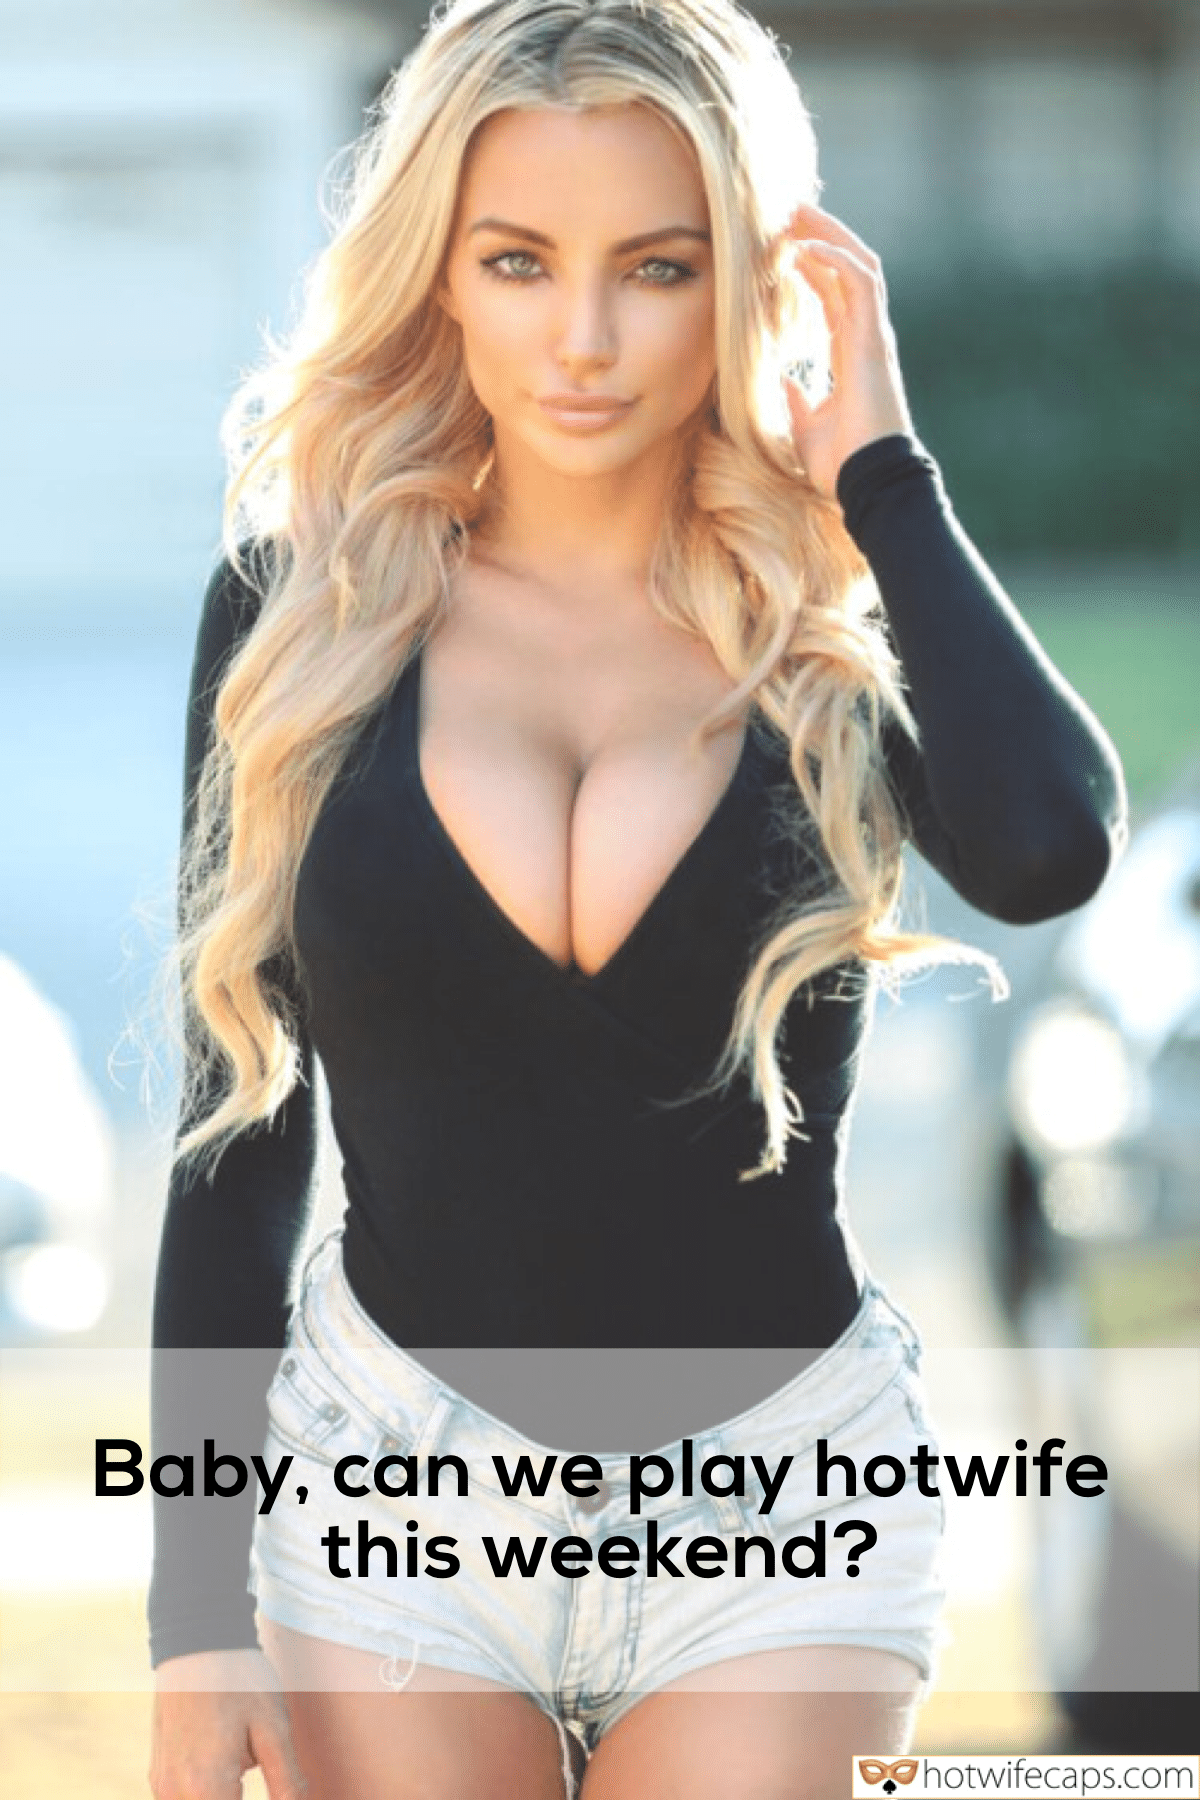 Sexy Memes Cheating hotwife caption: Baby, can we play hotwife this weekend? Blonde Barbie Girl Wants to Be Naughty